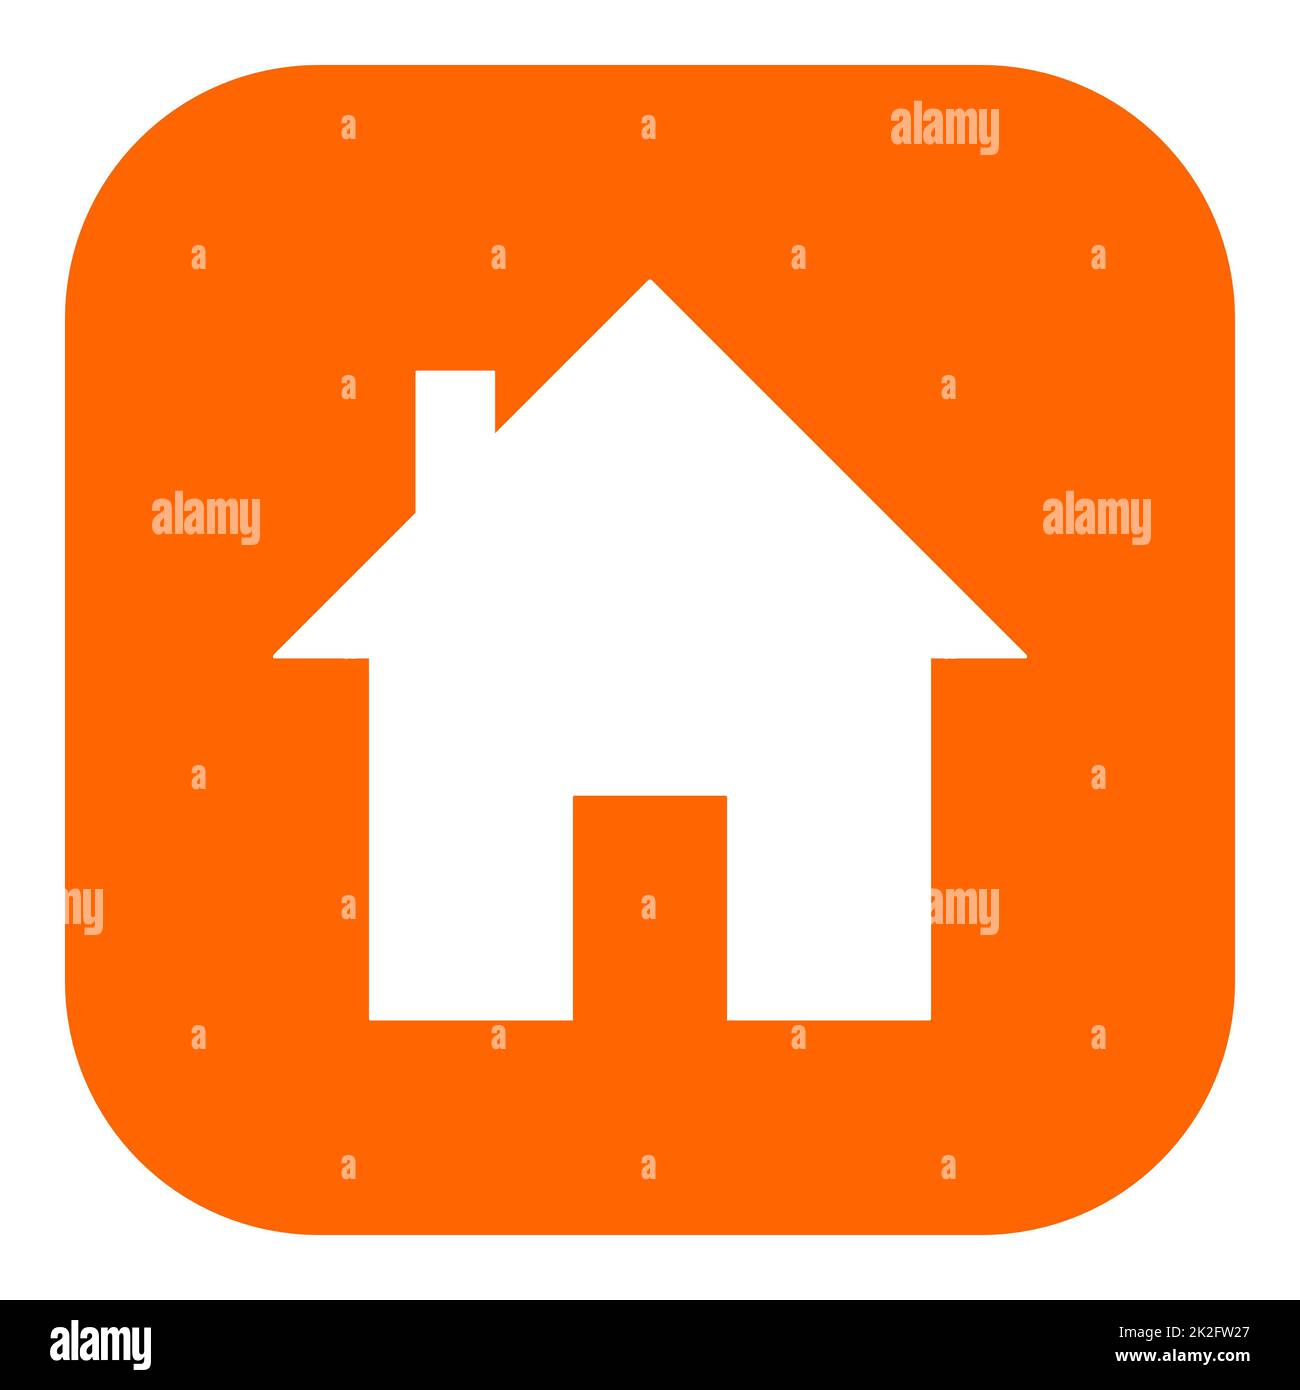 Home and app icon Stock Photo